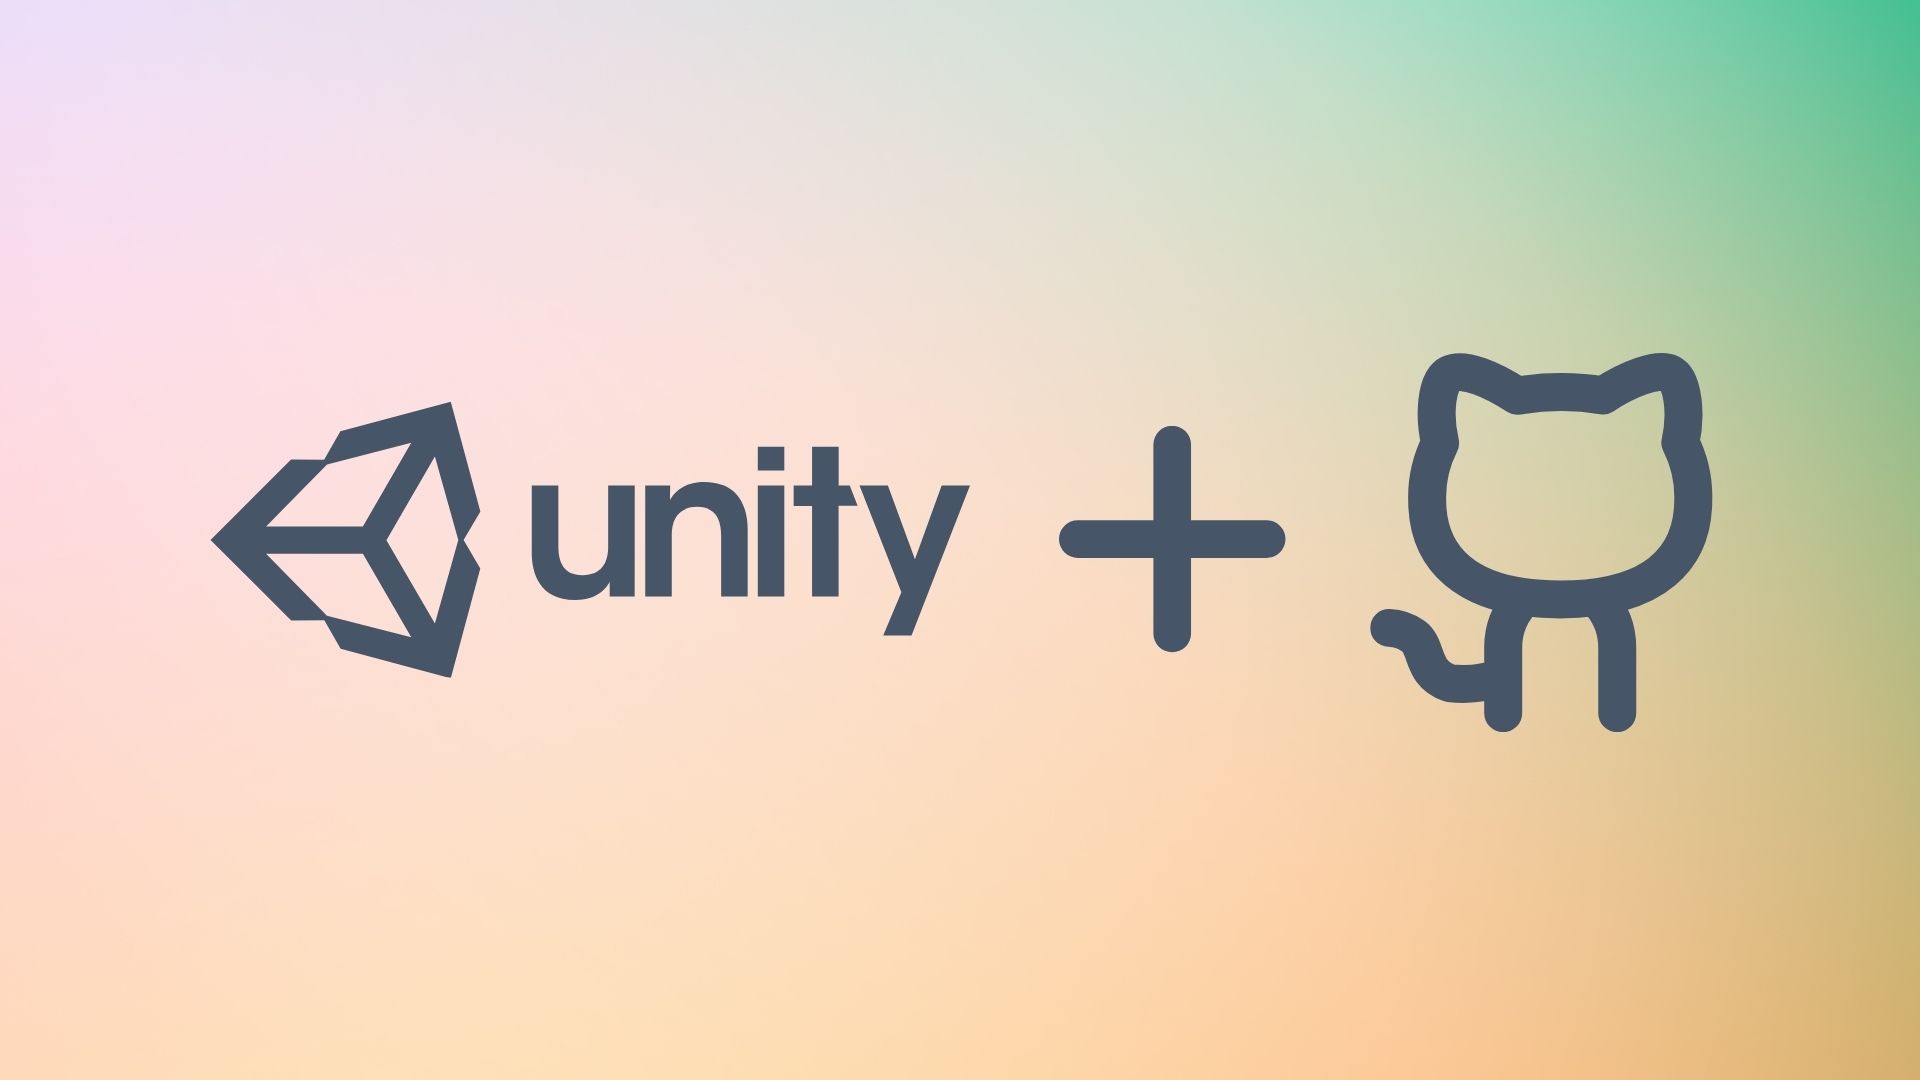 The unity and github icons with a plus symbol in between.